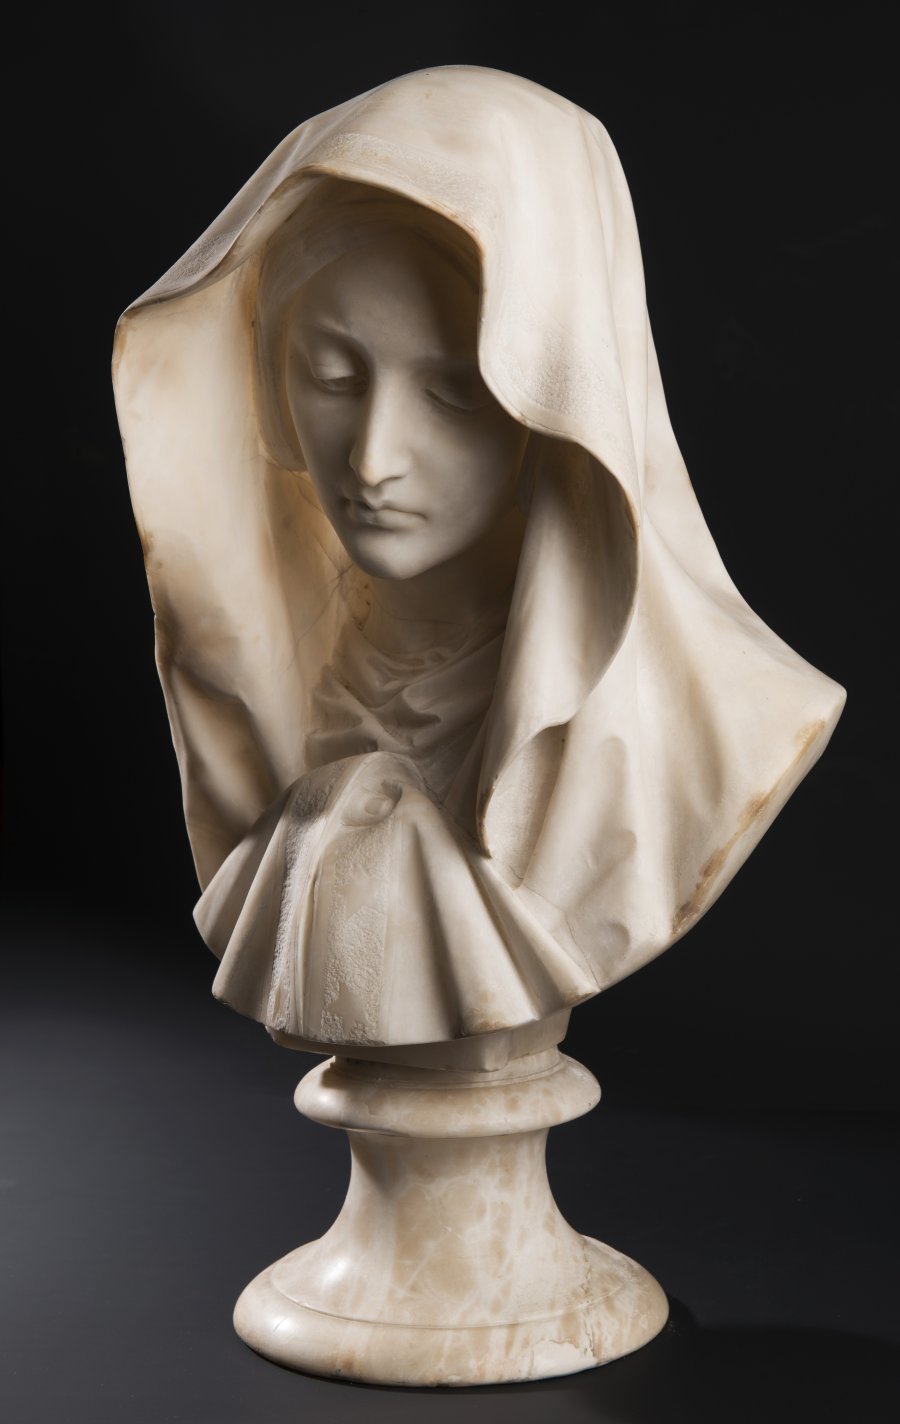 YOUNG LADY WITH A VEIL